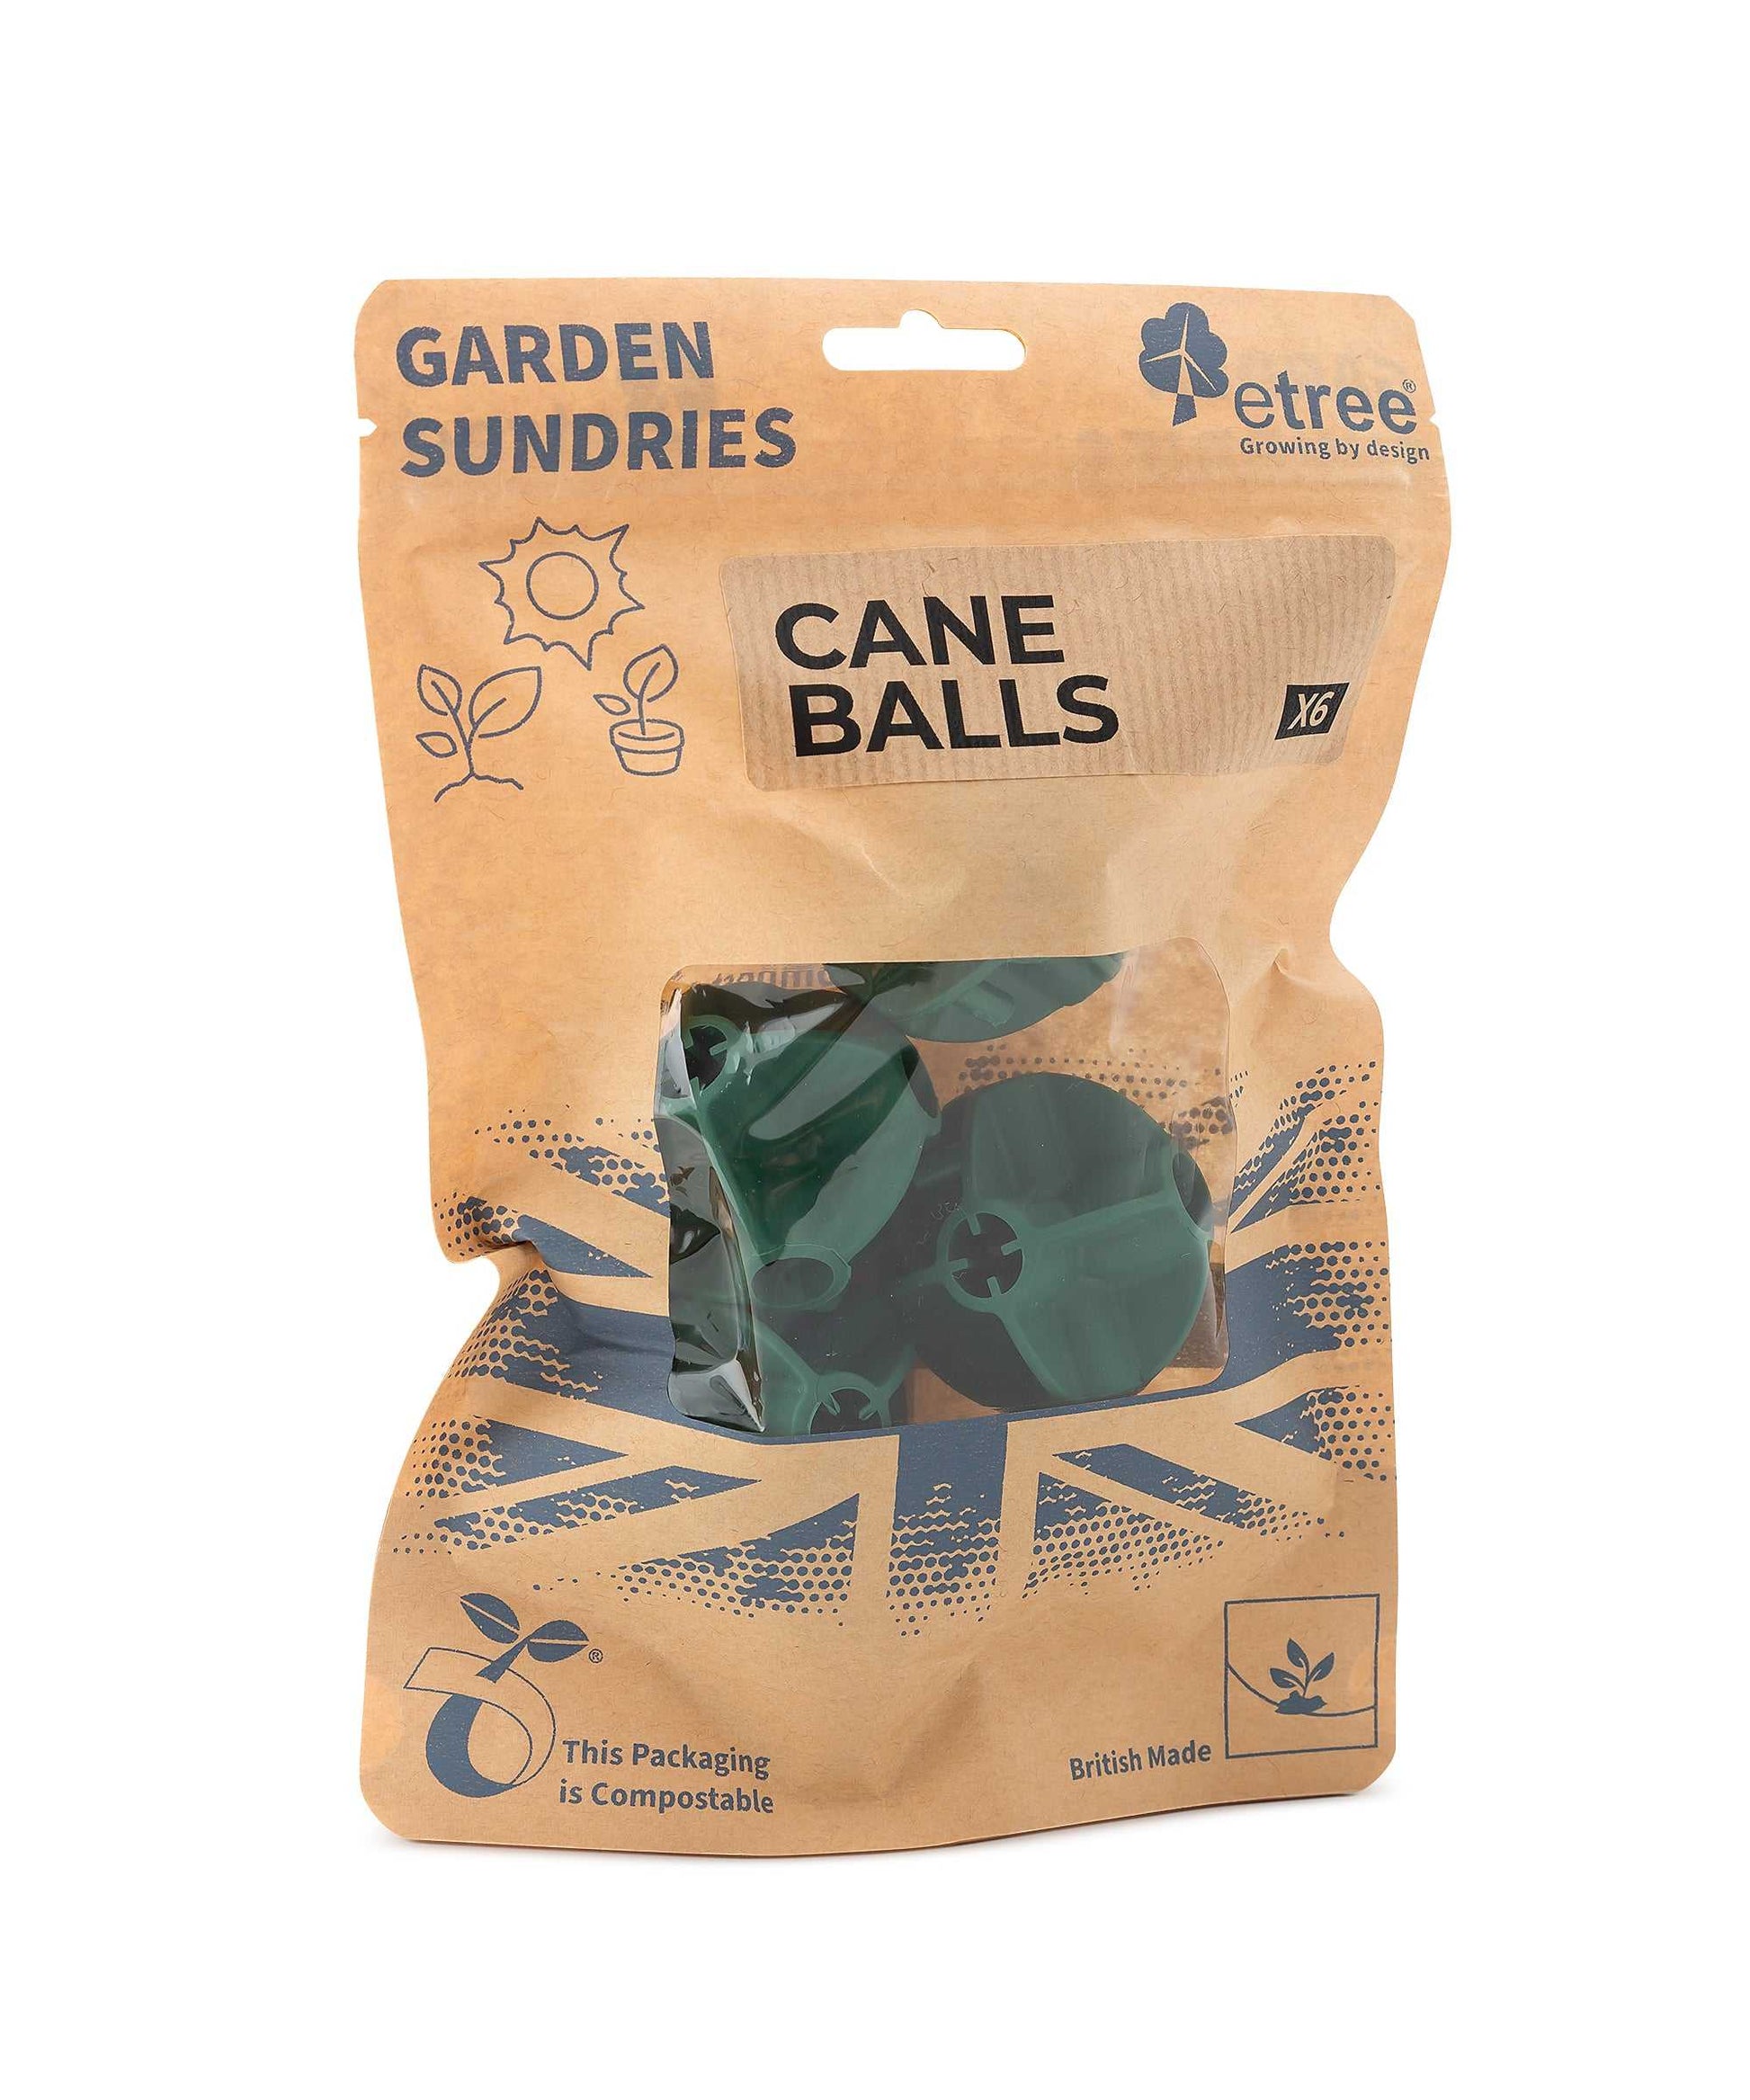 Cane Balls - Build netting cages and plant structures the simple way.-1